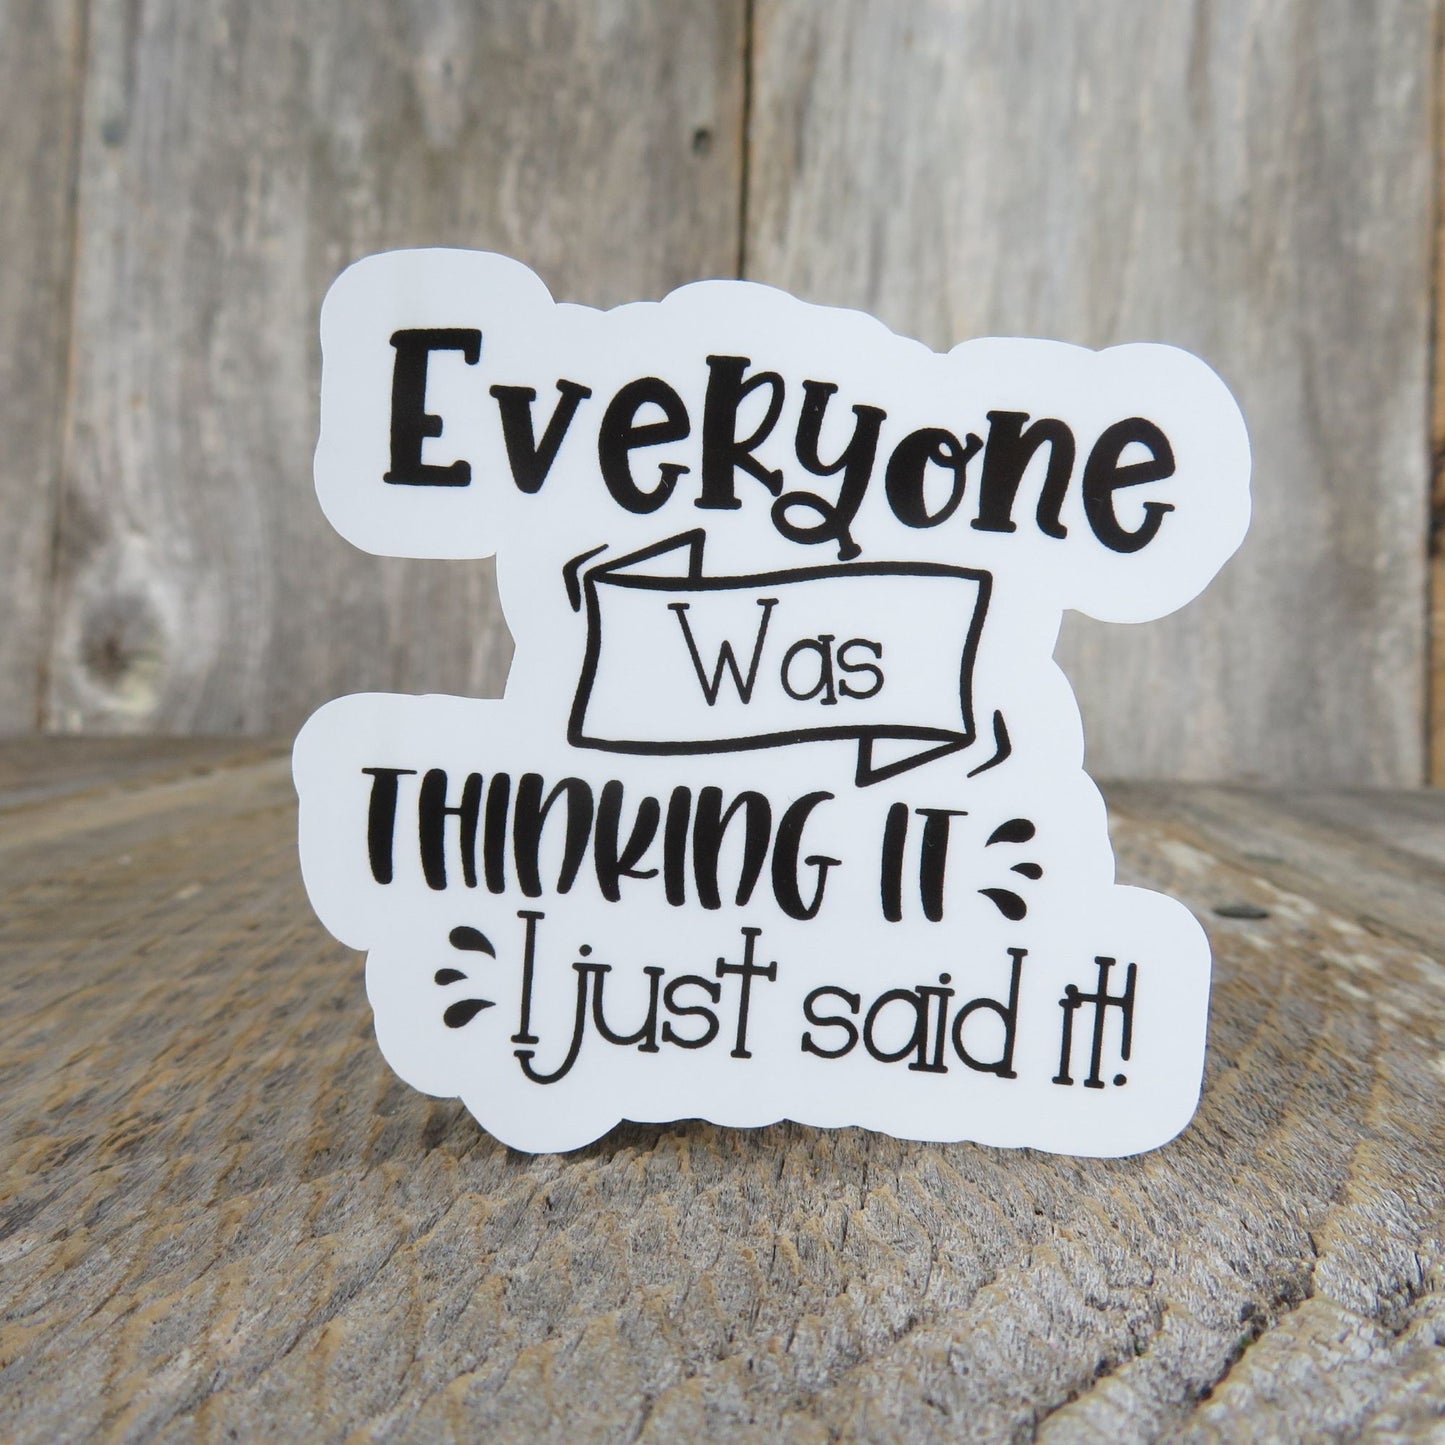 Everyone Was Thinking It I Just Said It Sticker Full Color Social Funny Sarcastic Outspoken Phrase Stickers